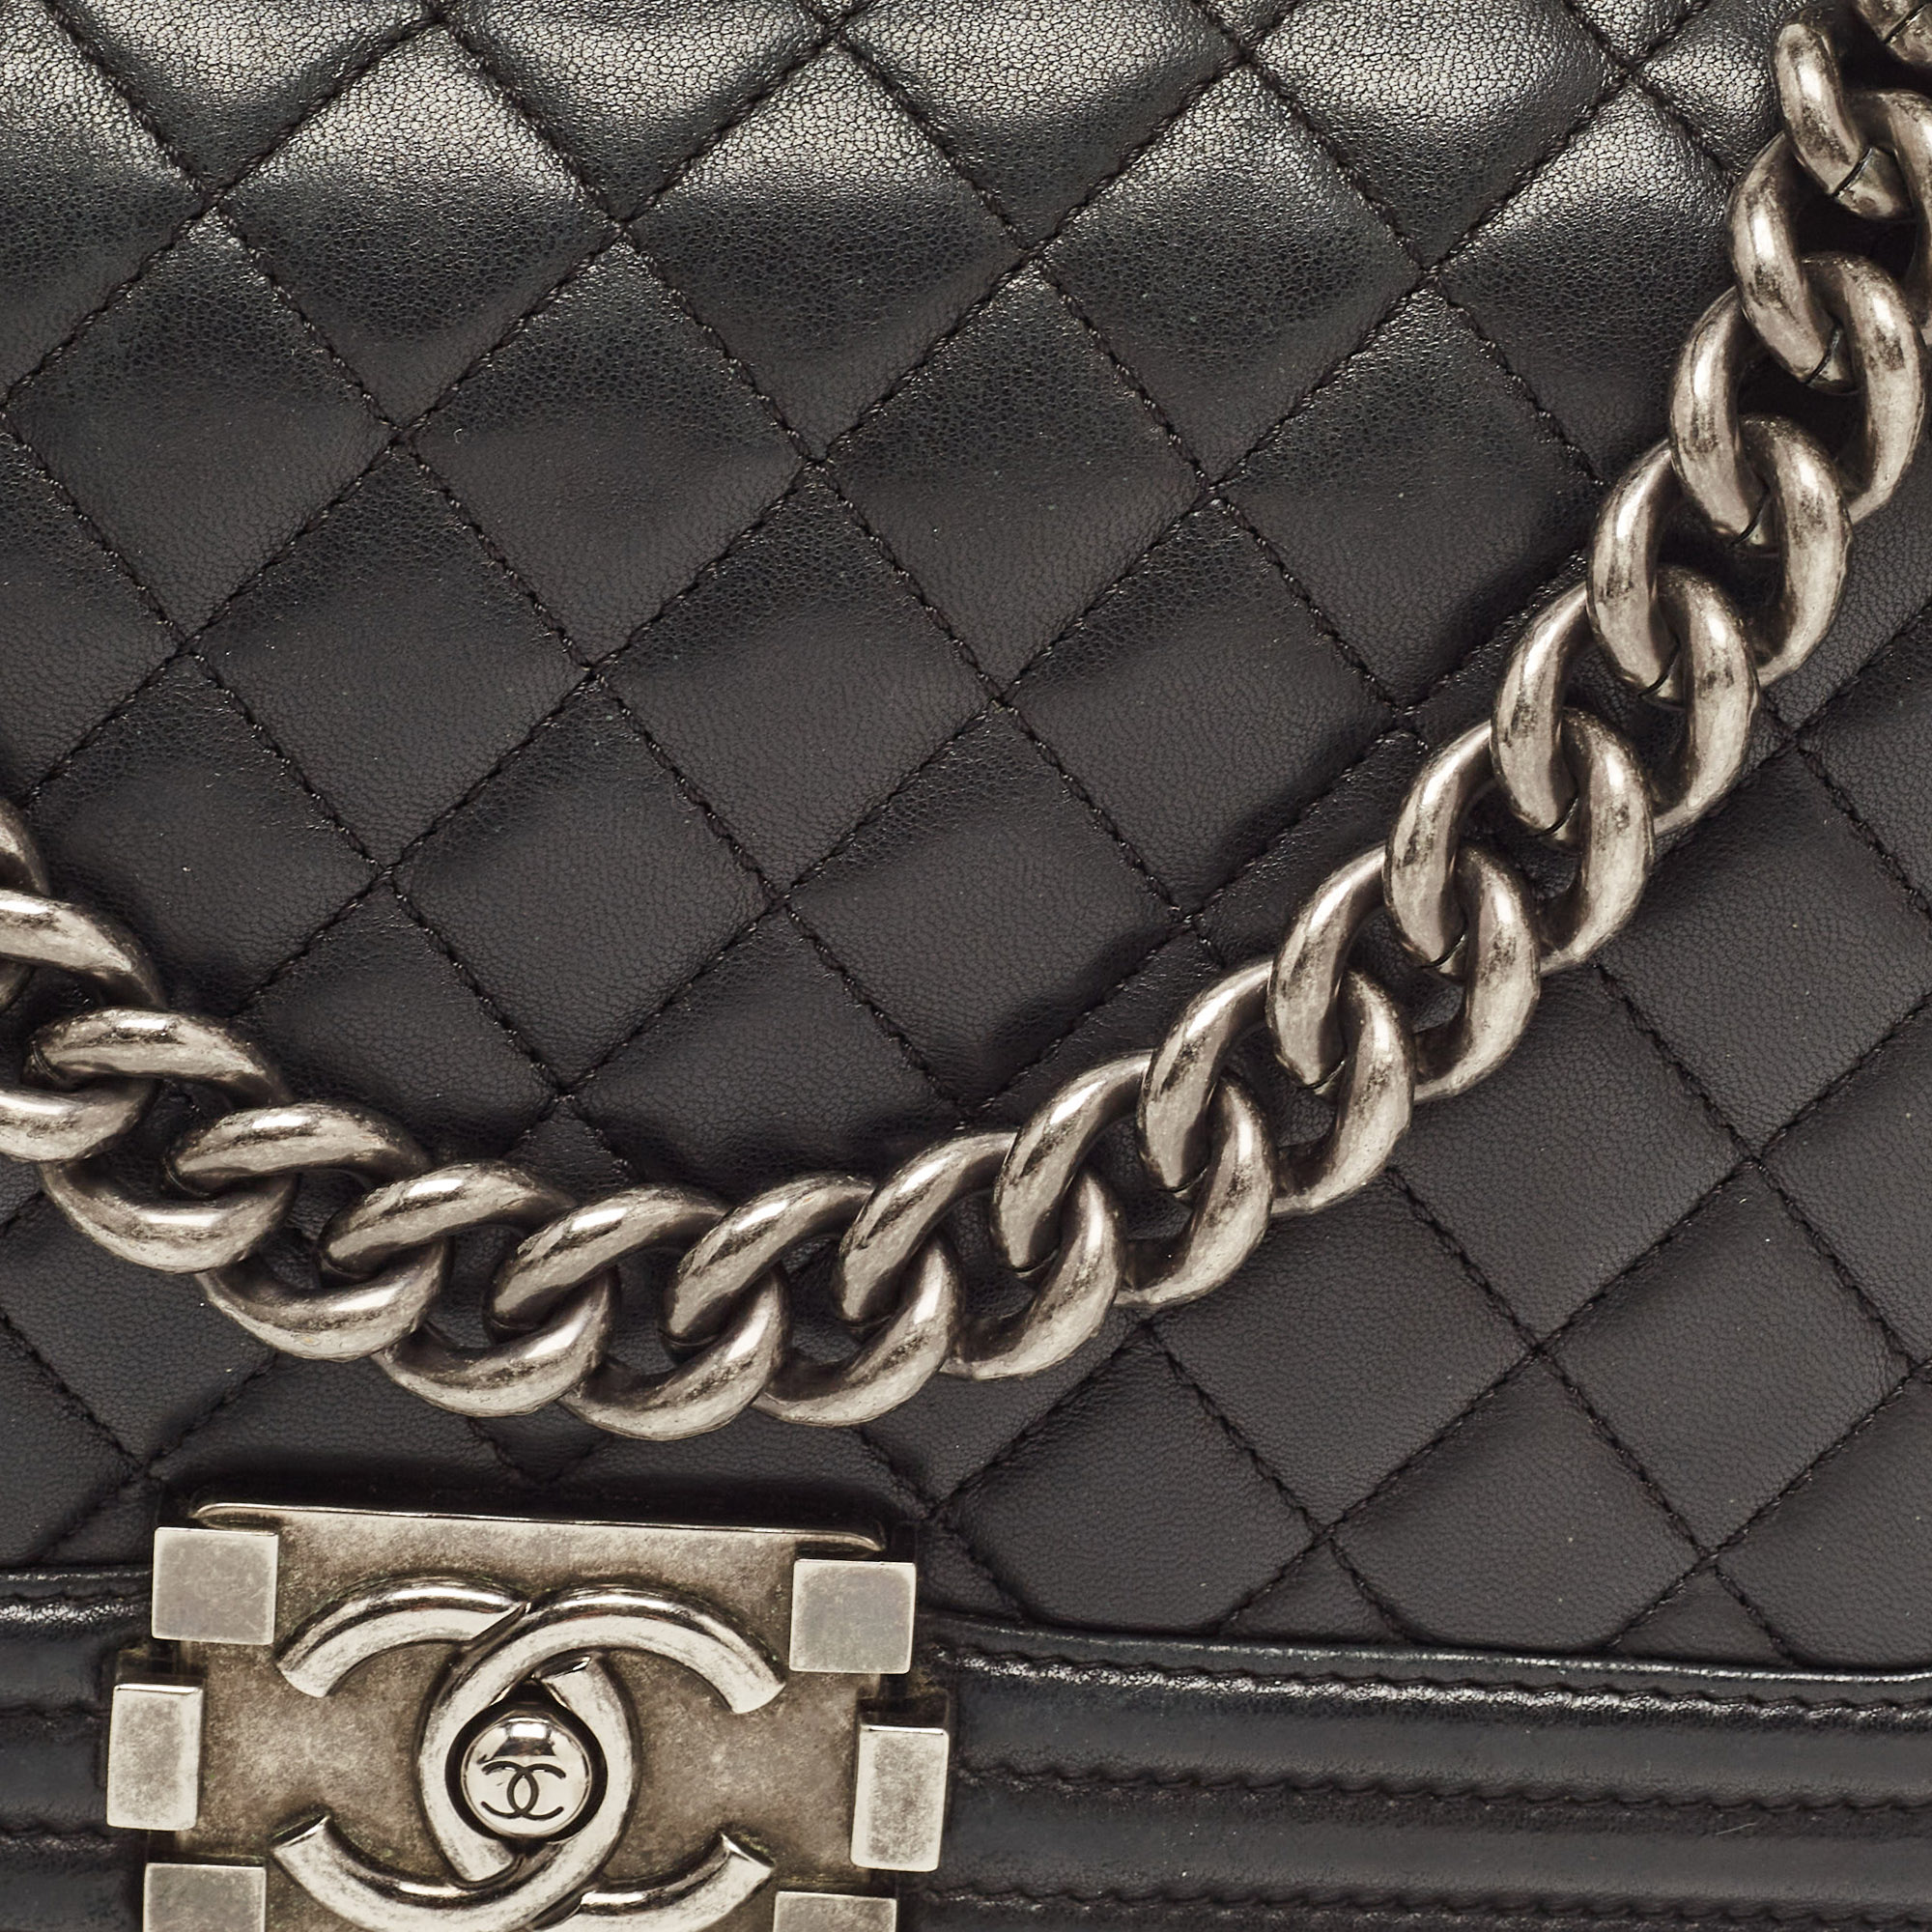 Chanel Black Quilted Leather Medium Boy Flap Bag